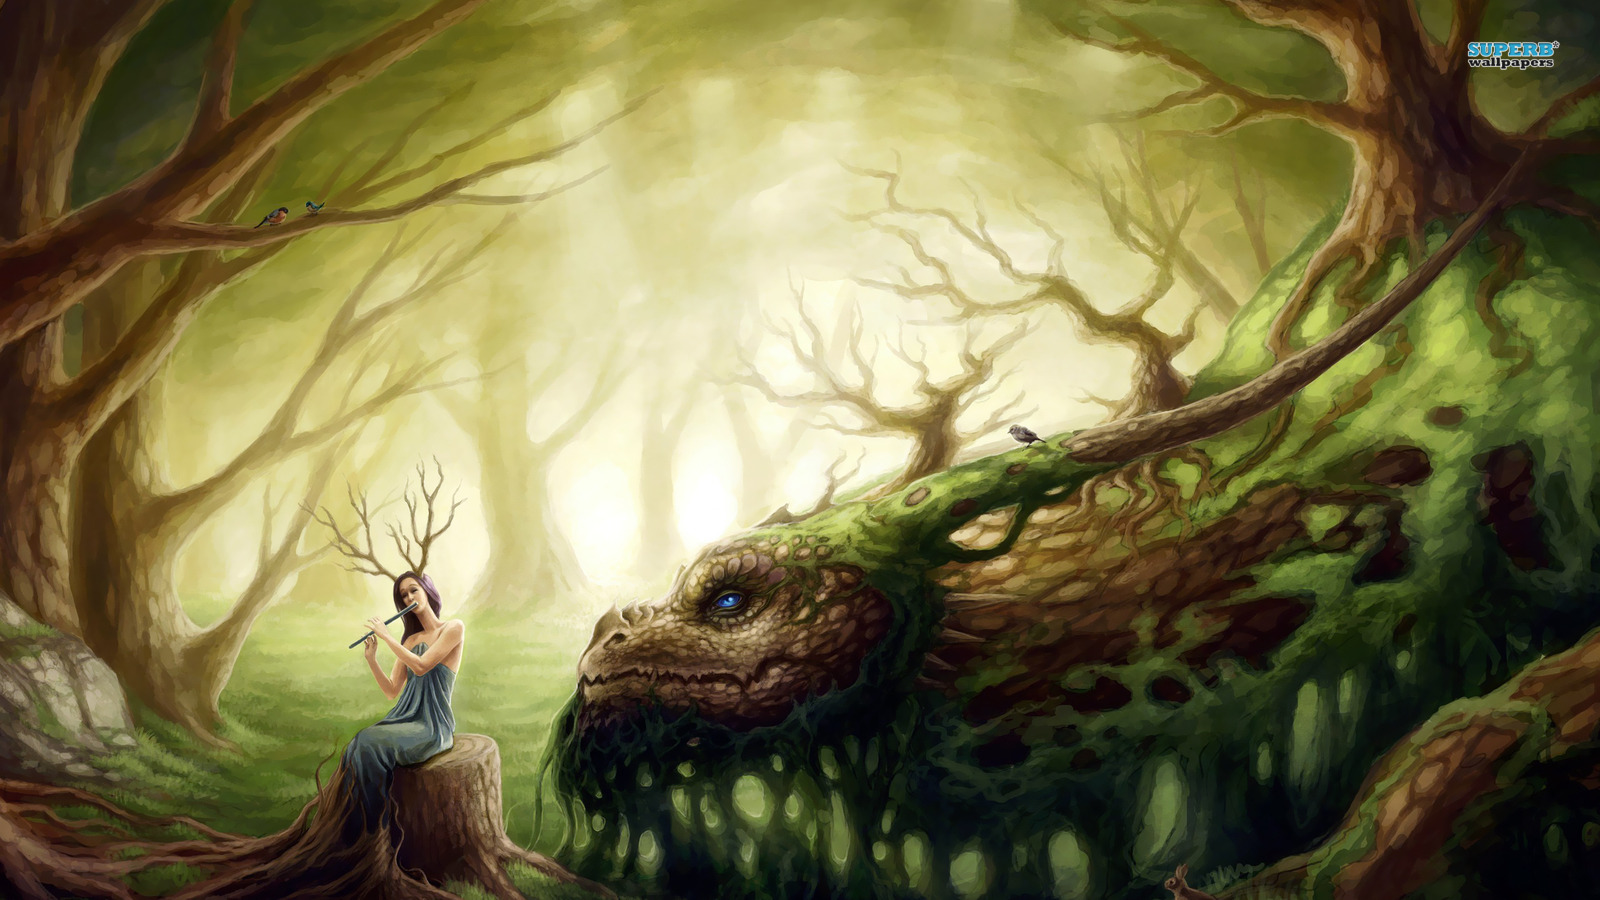 Nature - Fantasy Forest Creatures - HD Wallpaper 